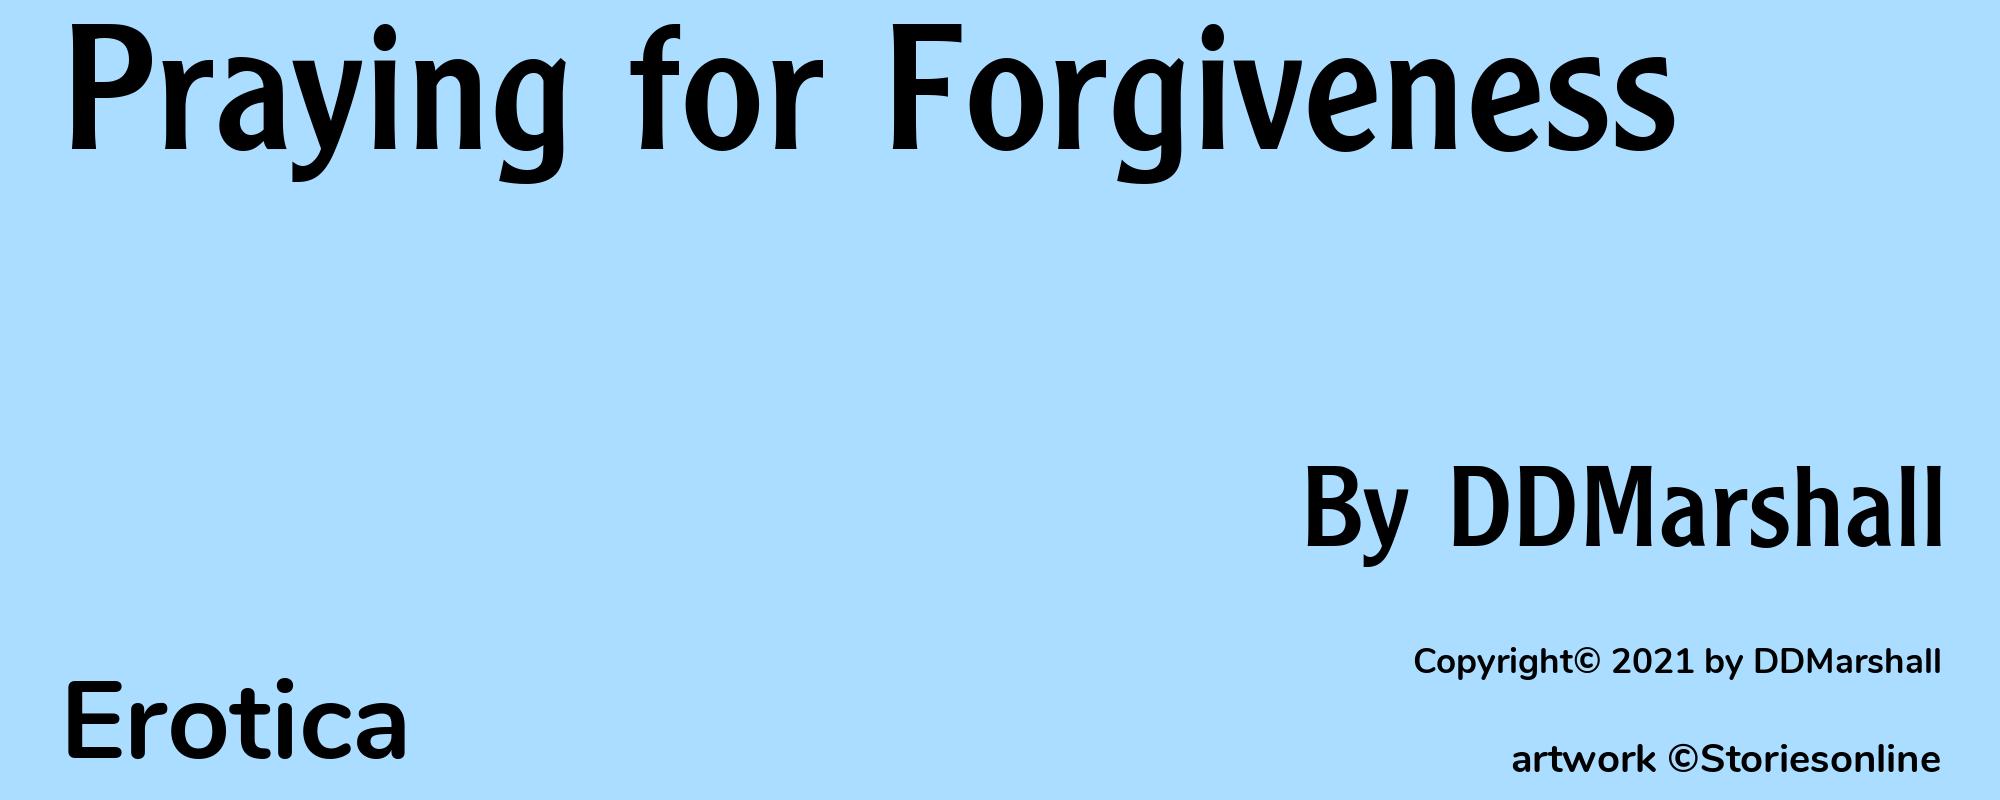 Praying for Forgiveness - Cover